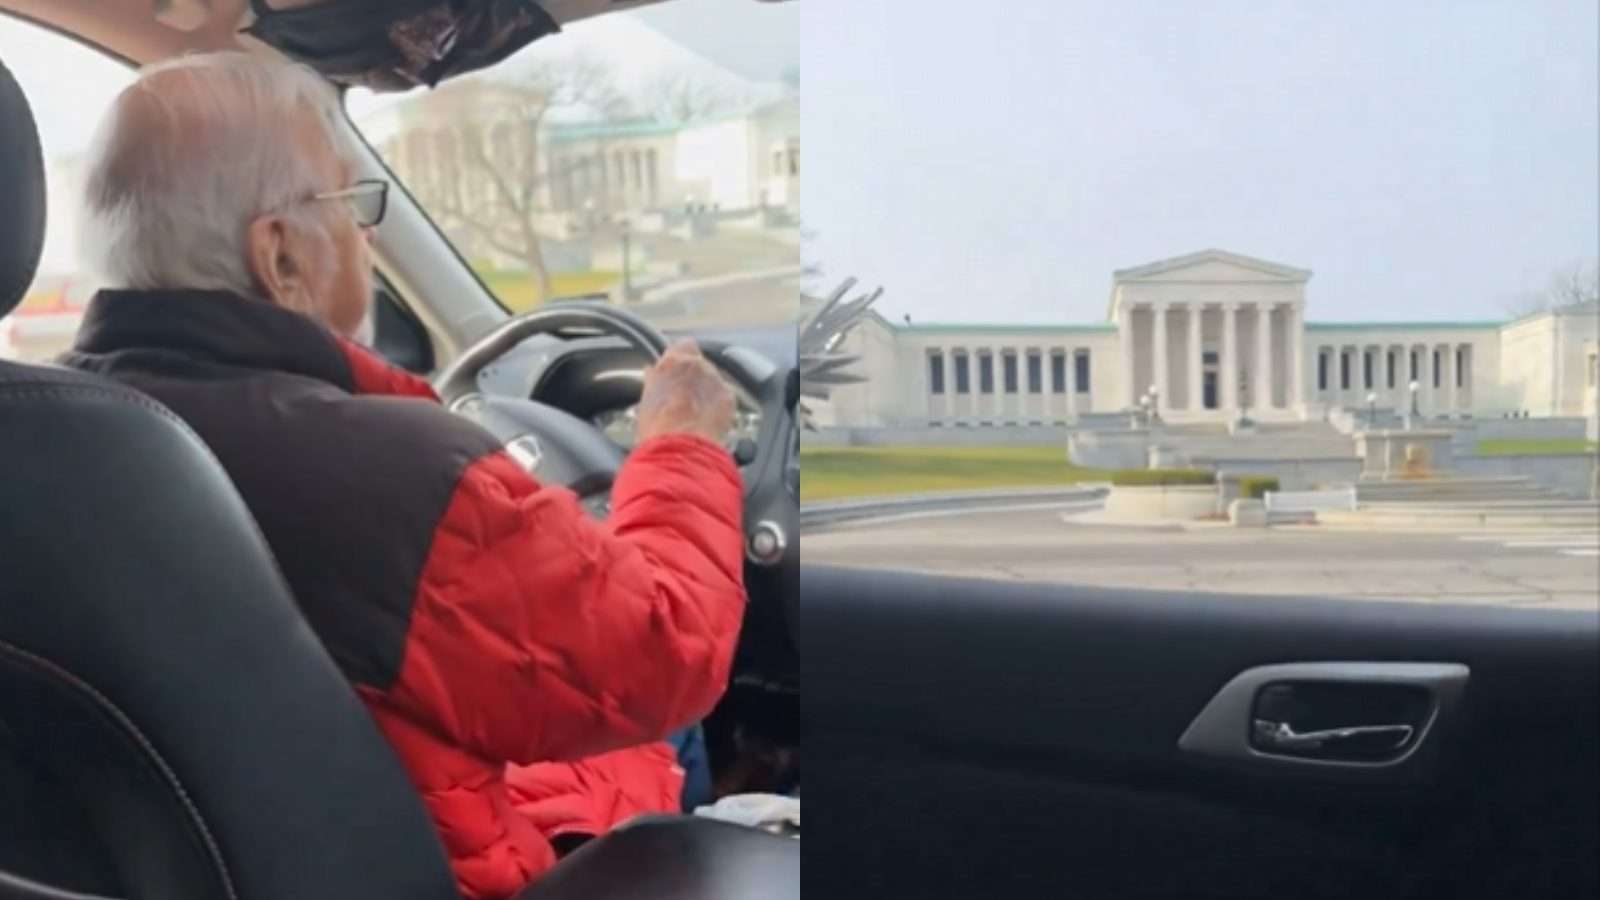 Uber driver gives passenger guided tour of Buffalo New York free of charge.